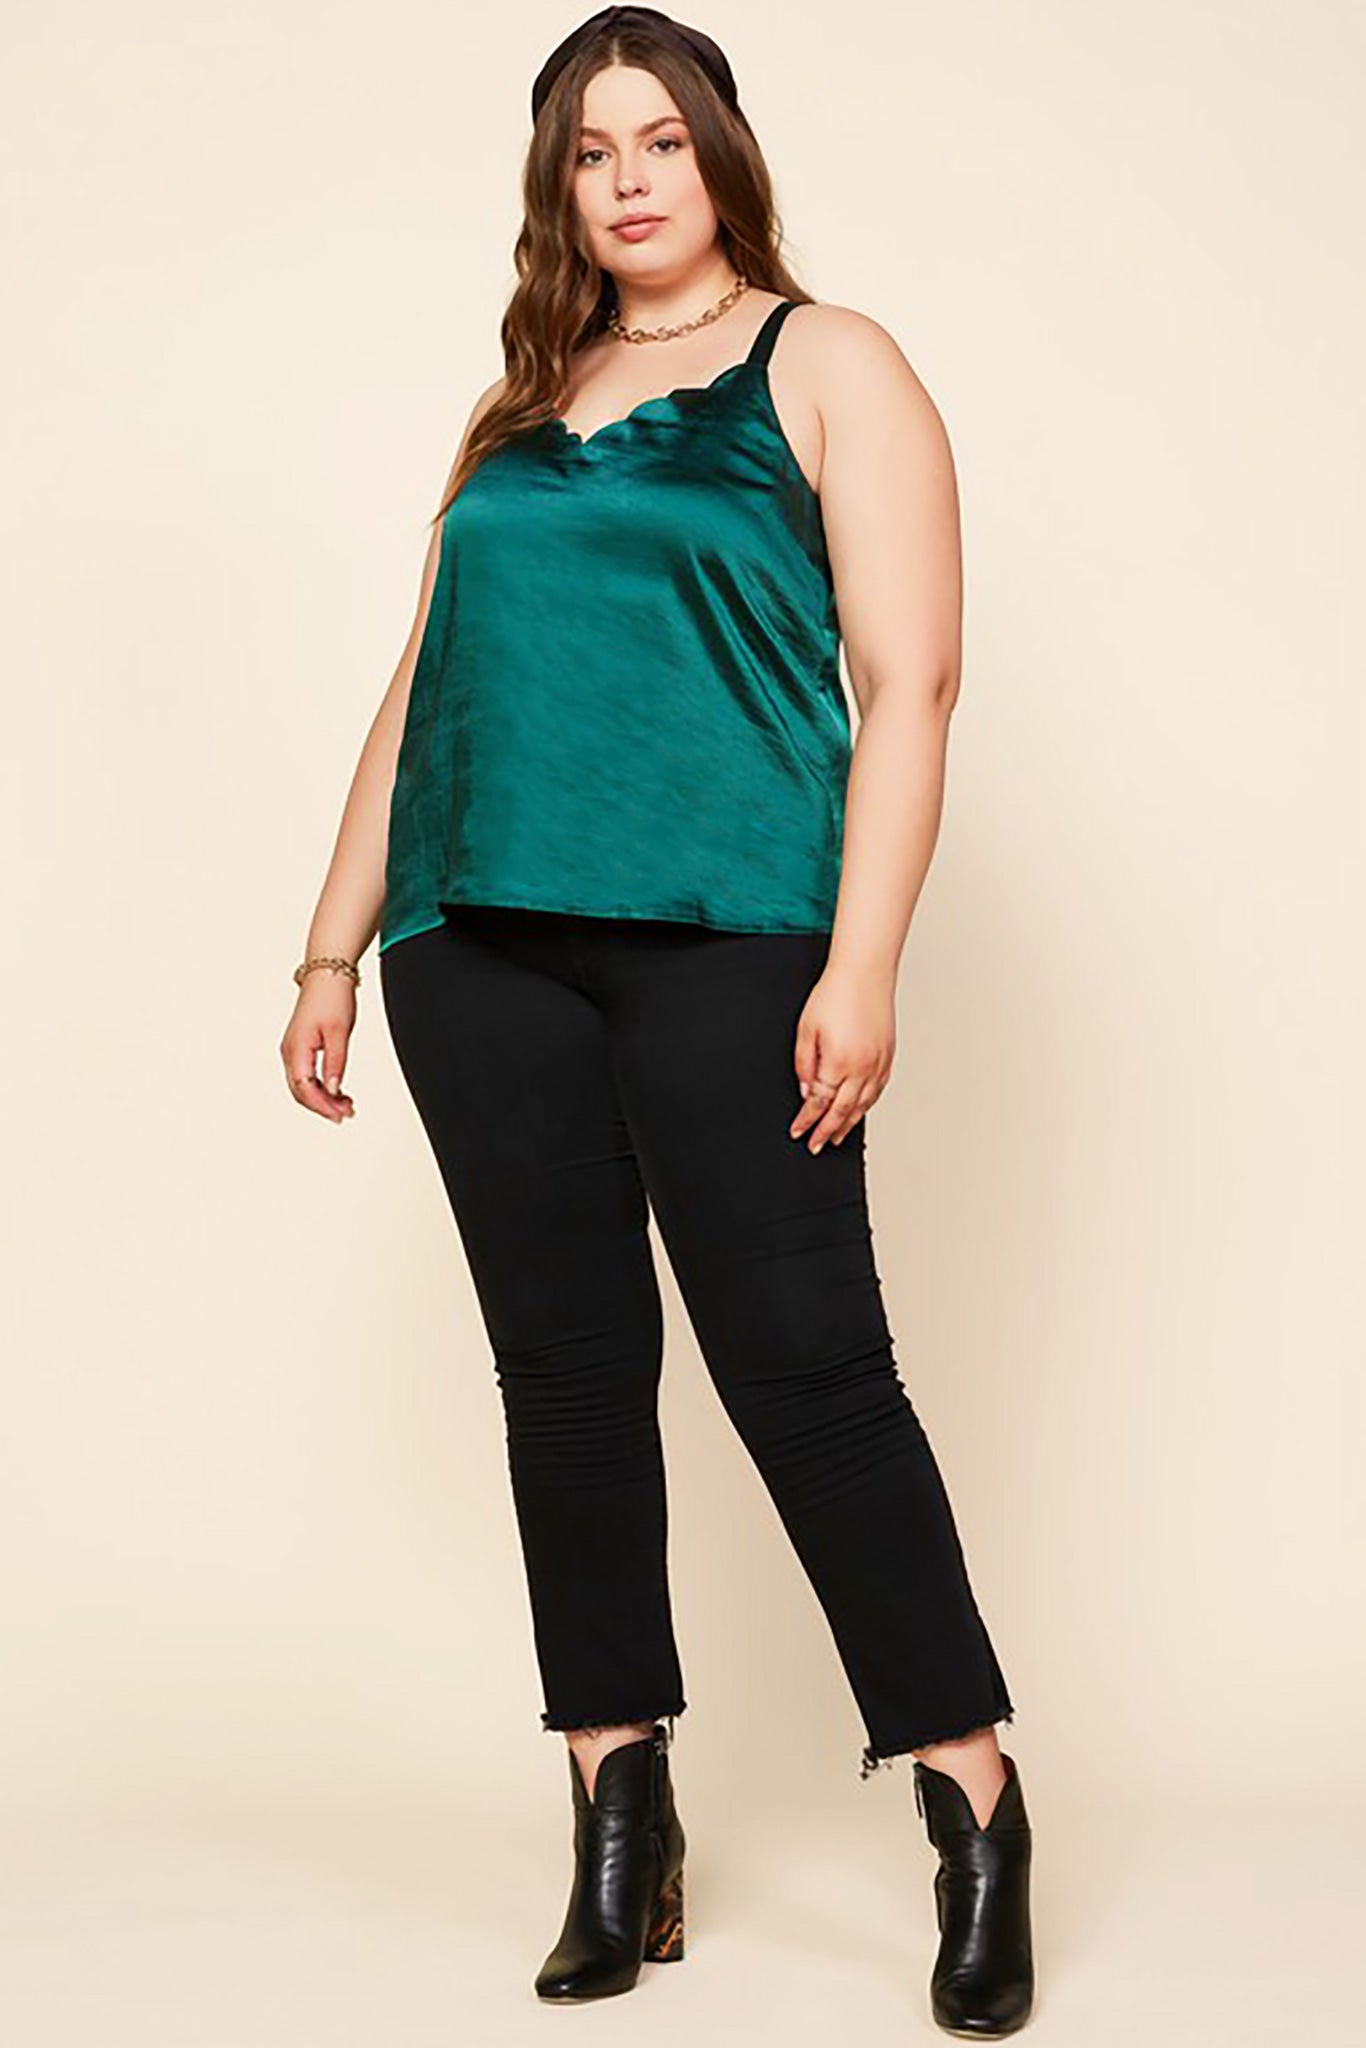 Belle and Broome Joy satin scalloped cami in emerald green on model with black jeans and black boots, full outfit view